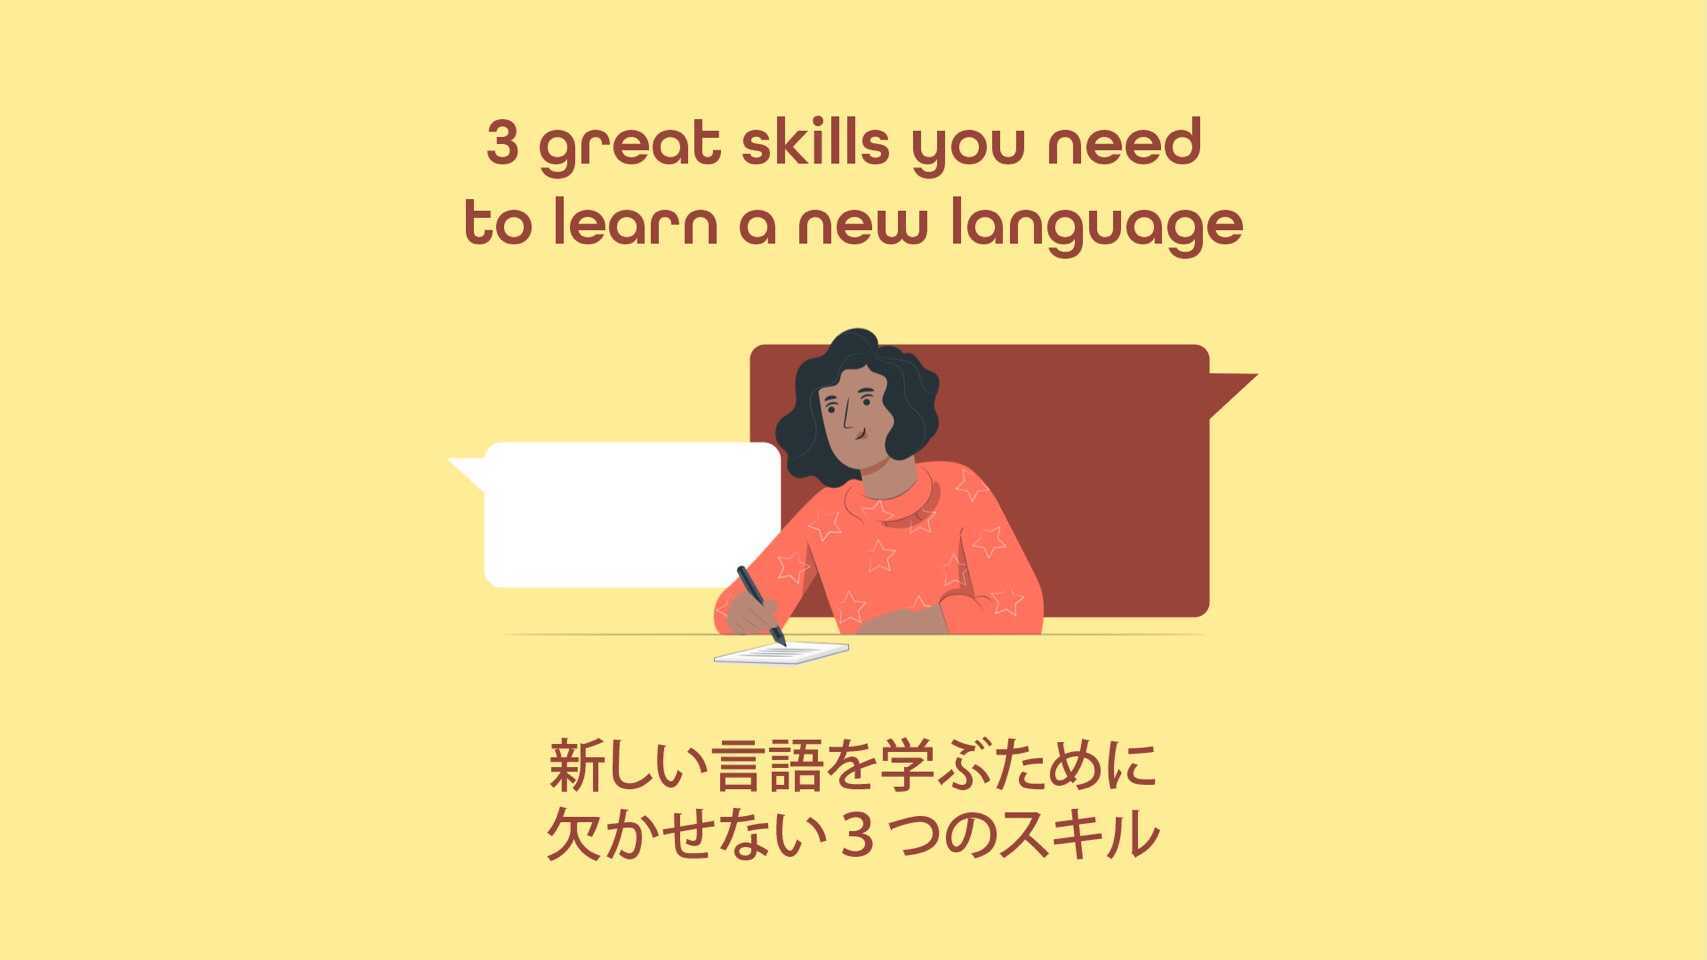 Featured image for “3 great skills to have when learning a new language”